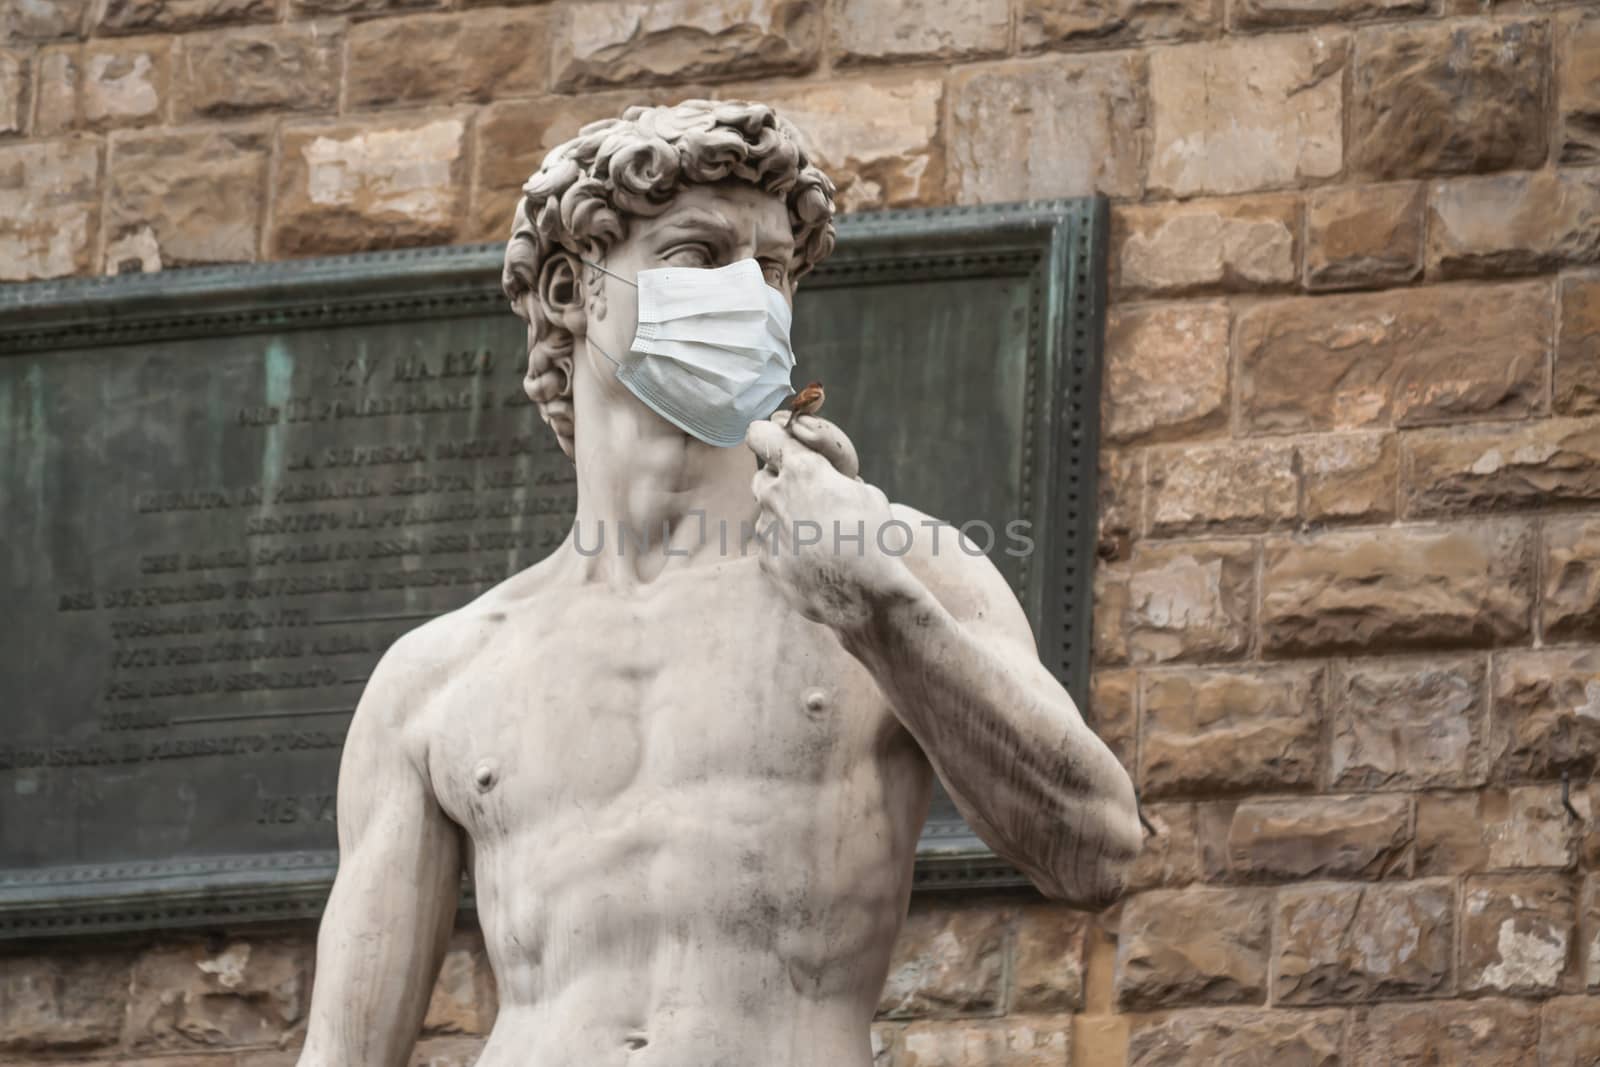 The Statue Of David in the Piazza della Signoria In Italy Wearing a Protective Face Mask.